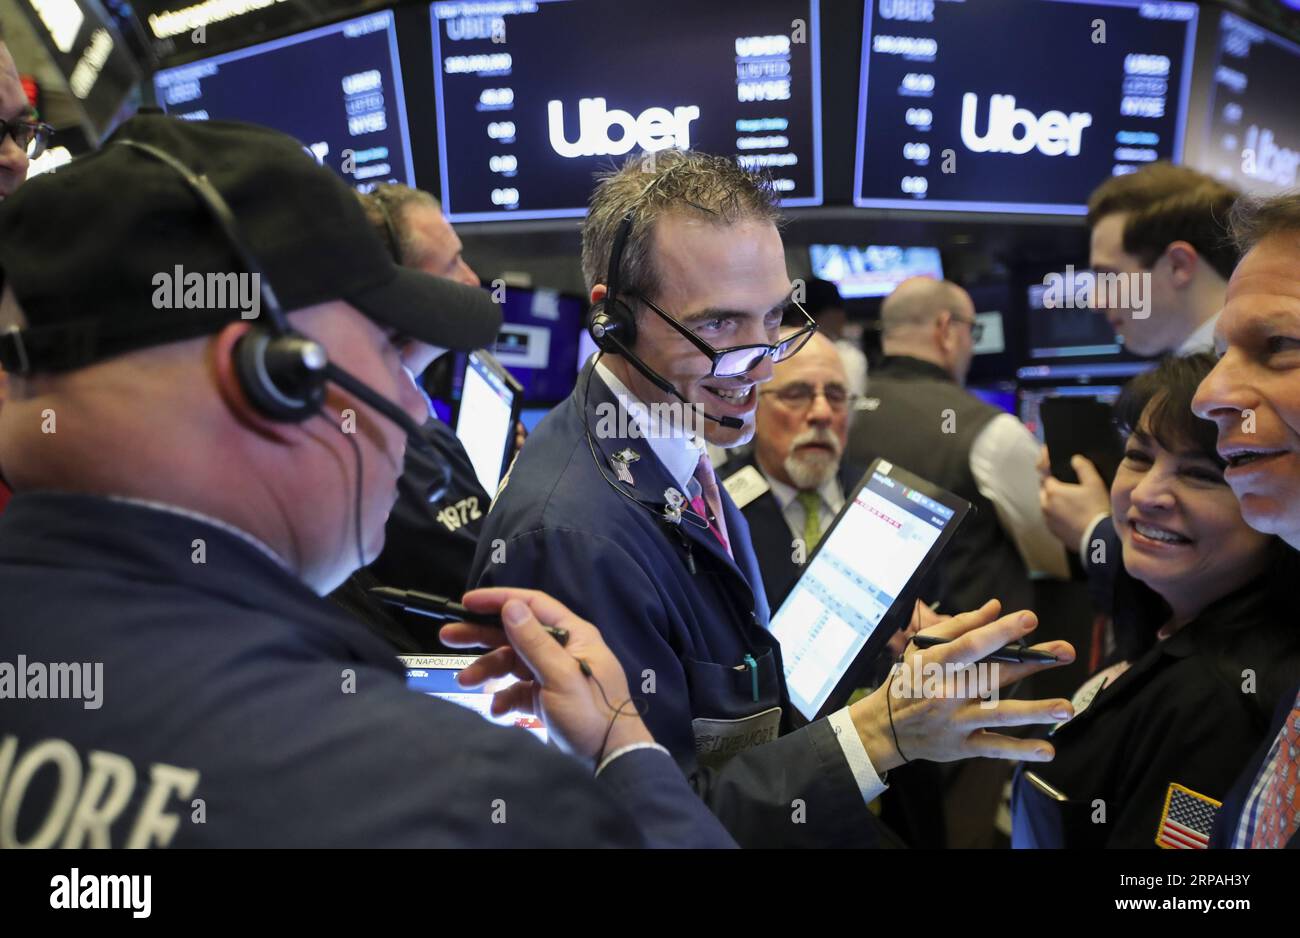 (190510) -- NEW YORK, May 10, 2019 (Xinhua) -- Traders work at the New York Stock Exchange during the initial public offering (IPO) of Uber Technologies Inc., in New York, the United States, May 10, 2019. U.S. ride hailing company Uber Technologies Inc. began trading on the NYSE on Friday. (Xinhua/Wang Ying) U.S.-NEW YORK-NYSE-UBER-IPO PUBLICATIONxNOTxINxCHN Stock Photo